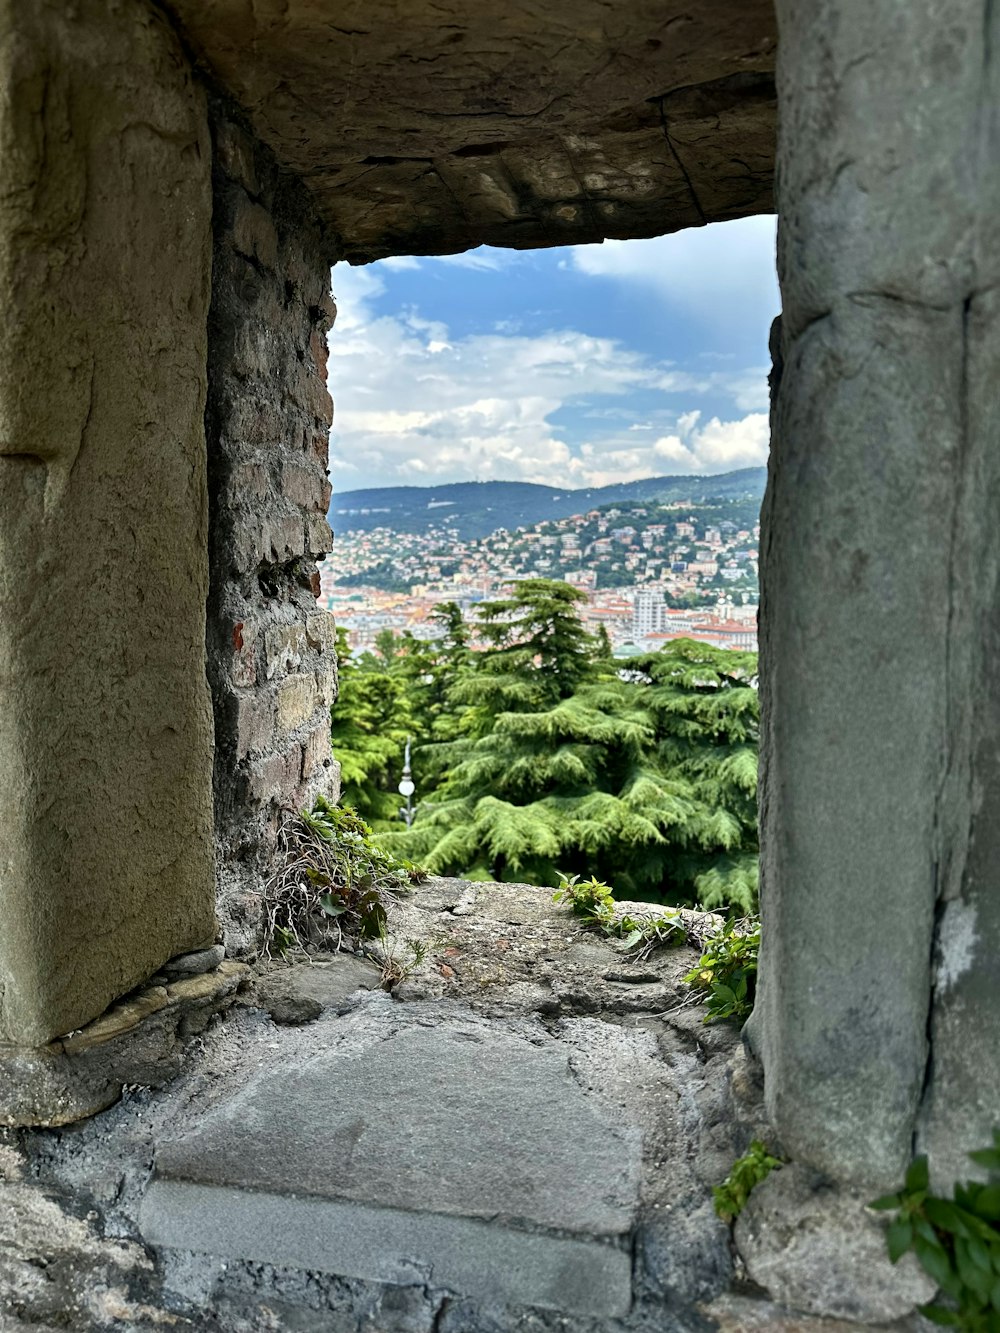 an open window with a view of a city in the distance